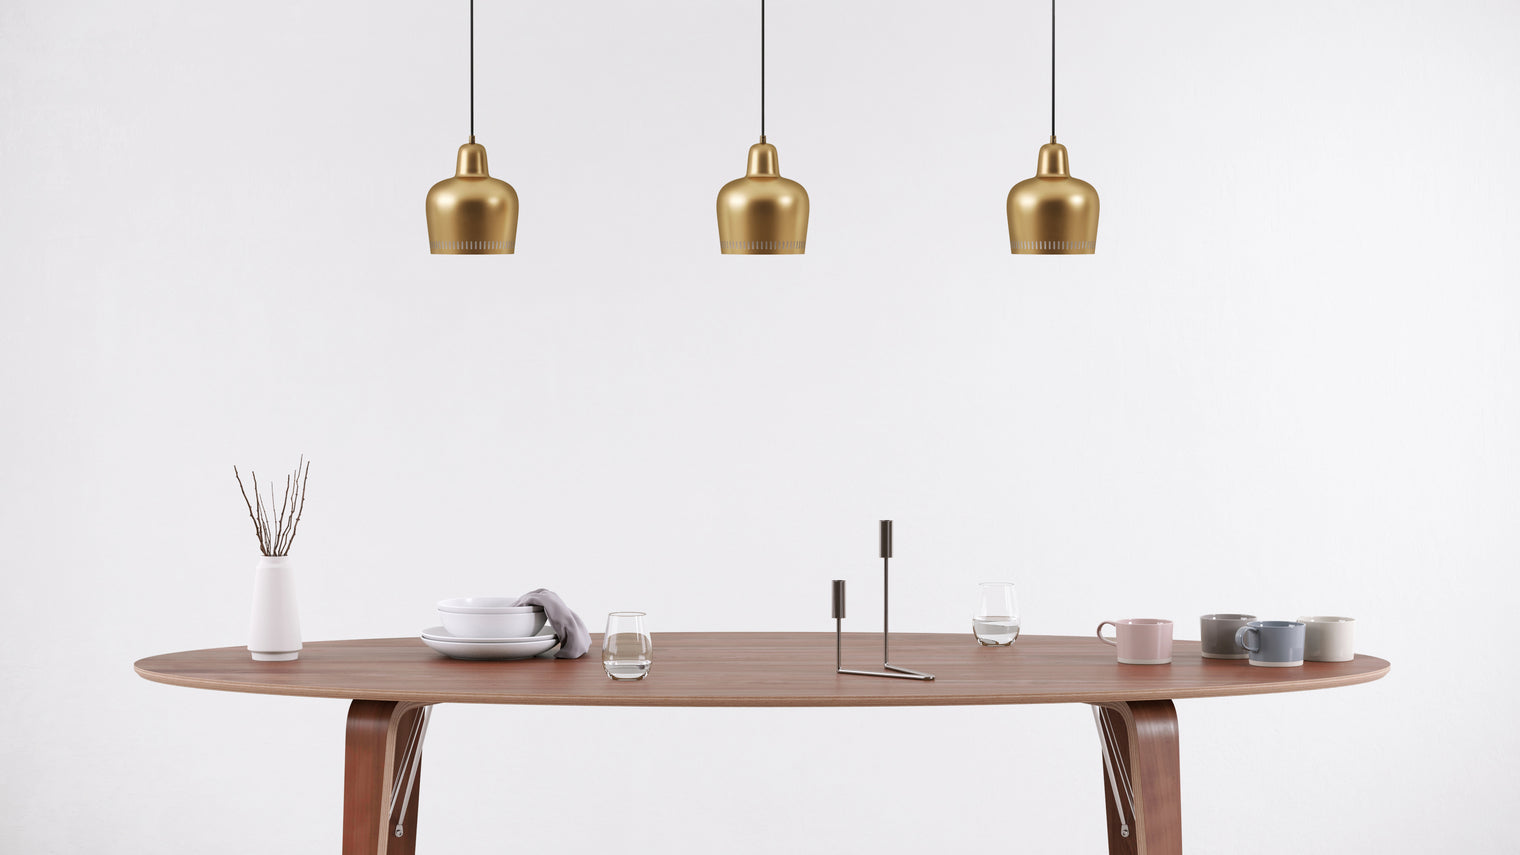 Bell-issimo | Designed for a restaurant in 1937, the Golden Bell Pendant Lamp is expertly crafted with single piece of steel featuring a polished brass coating on its exterior. It’s a stunning modern touch that draws the eye every time.
